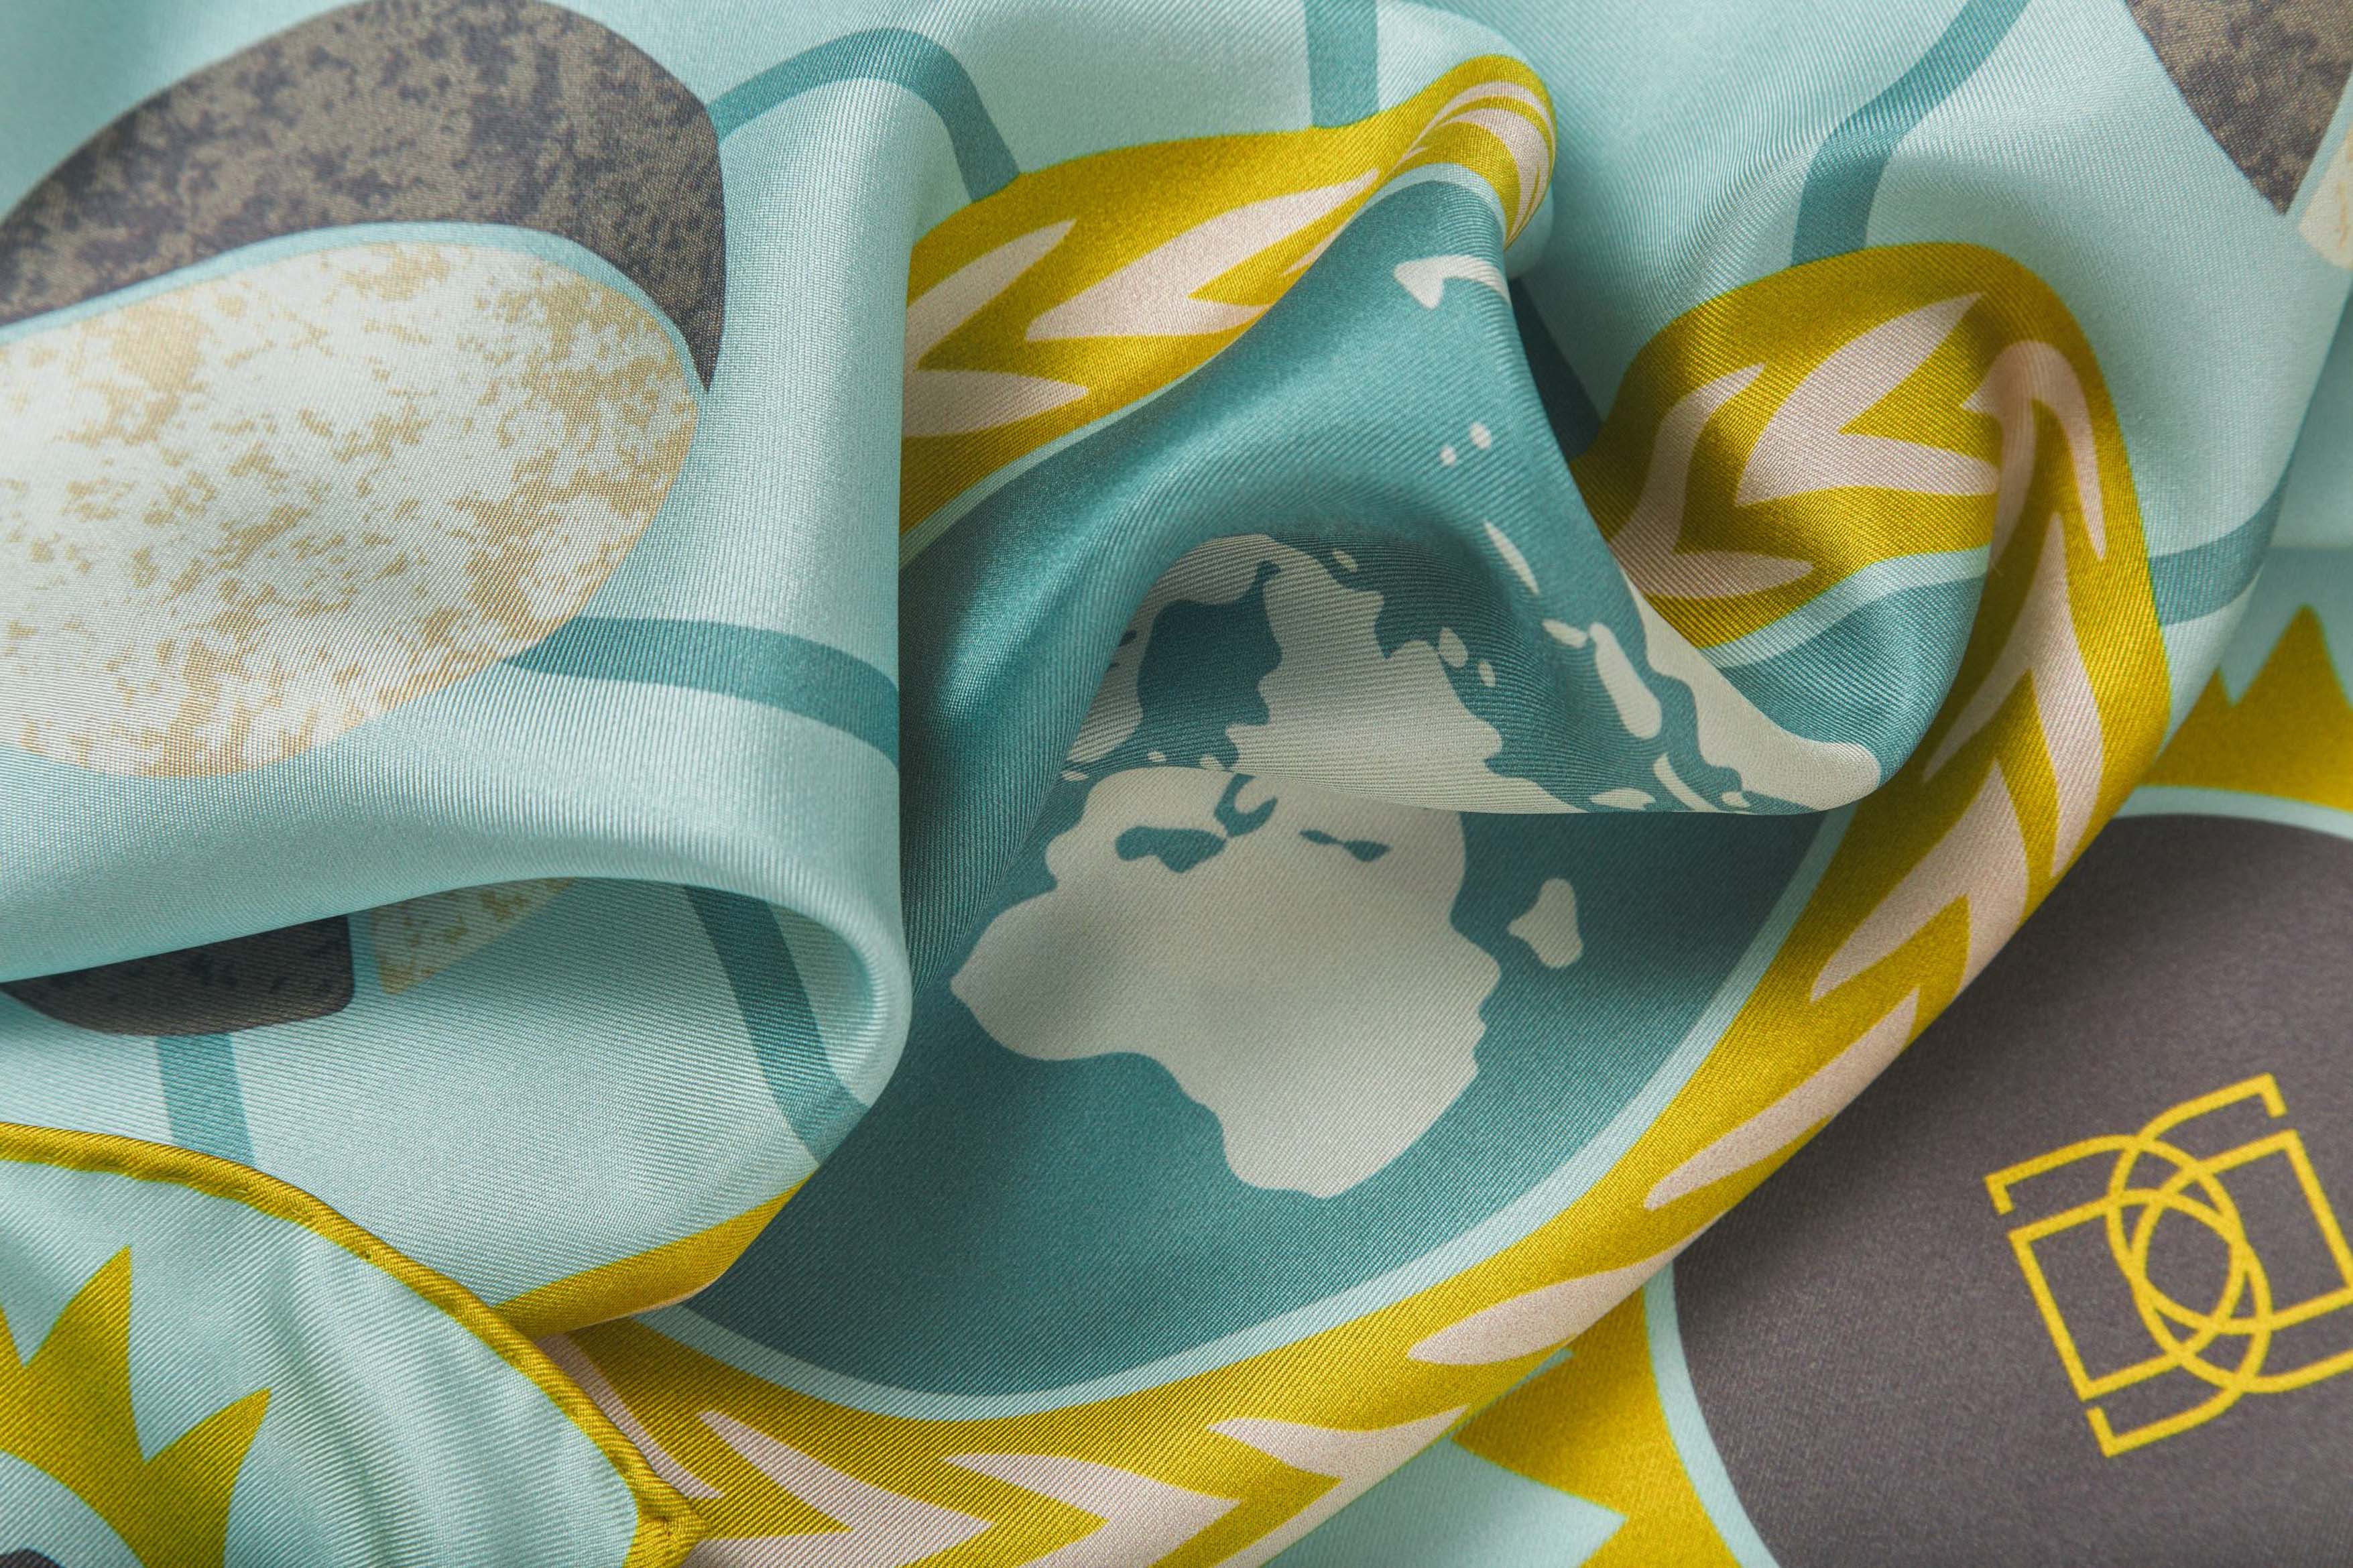 Close-up image of 100% silk square scarf featuring a motif of featuring a motif of stars, the sun and the moon phases positioned around planet Earth. Details in shades of rich turquoise, marine blue, white, chartreuse and maize on a light turquoise background. Illustrates the lightly ridged texture of the silk twill along with the rich color tones and luminous nature of the silk scarf.